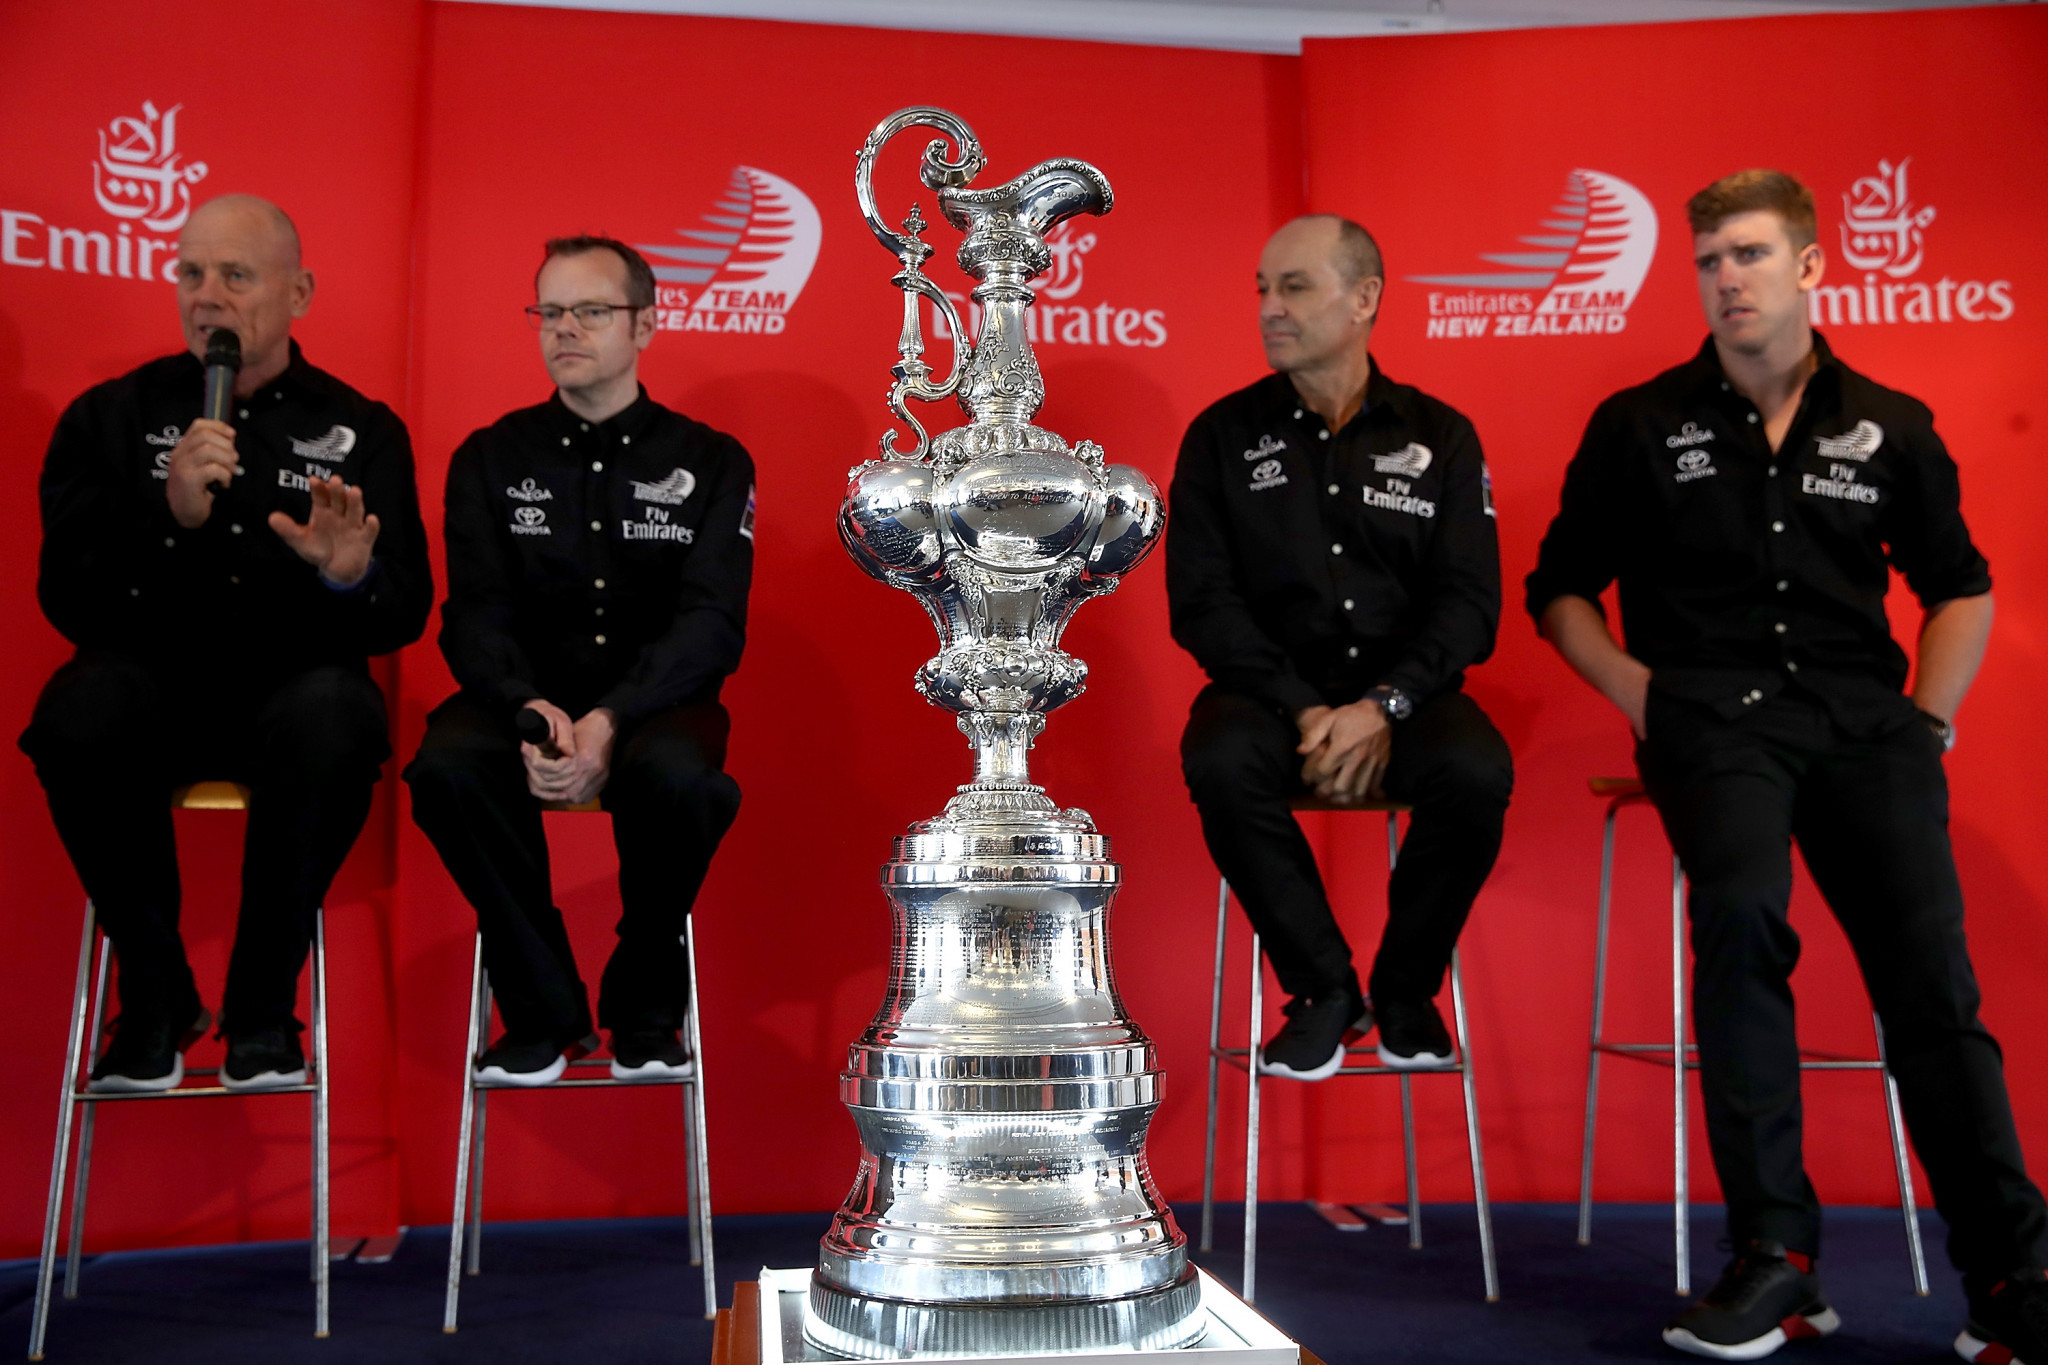 Auckland has been confirmed as the host for the 2021 America's Cup ©Getty Images